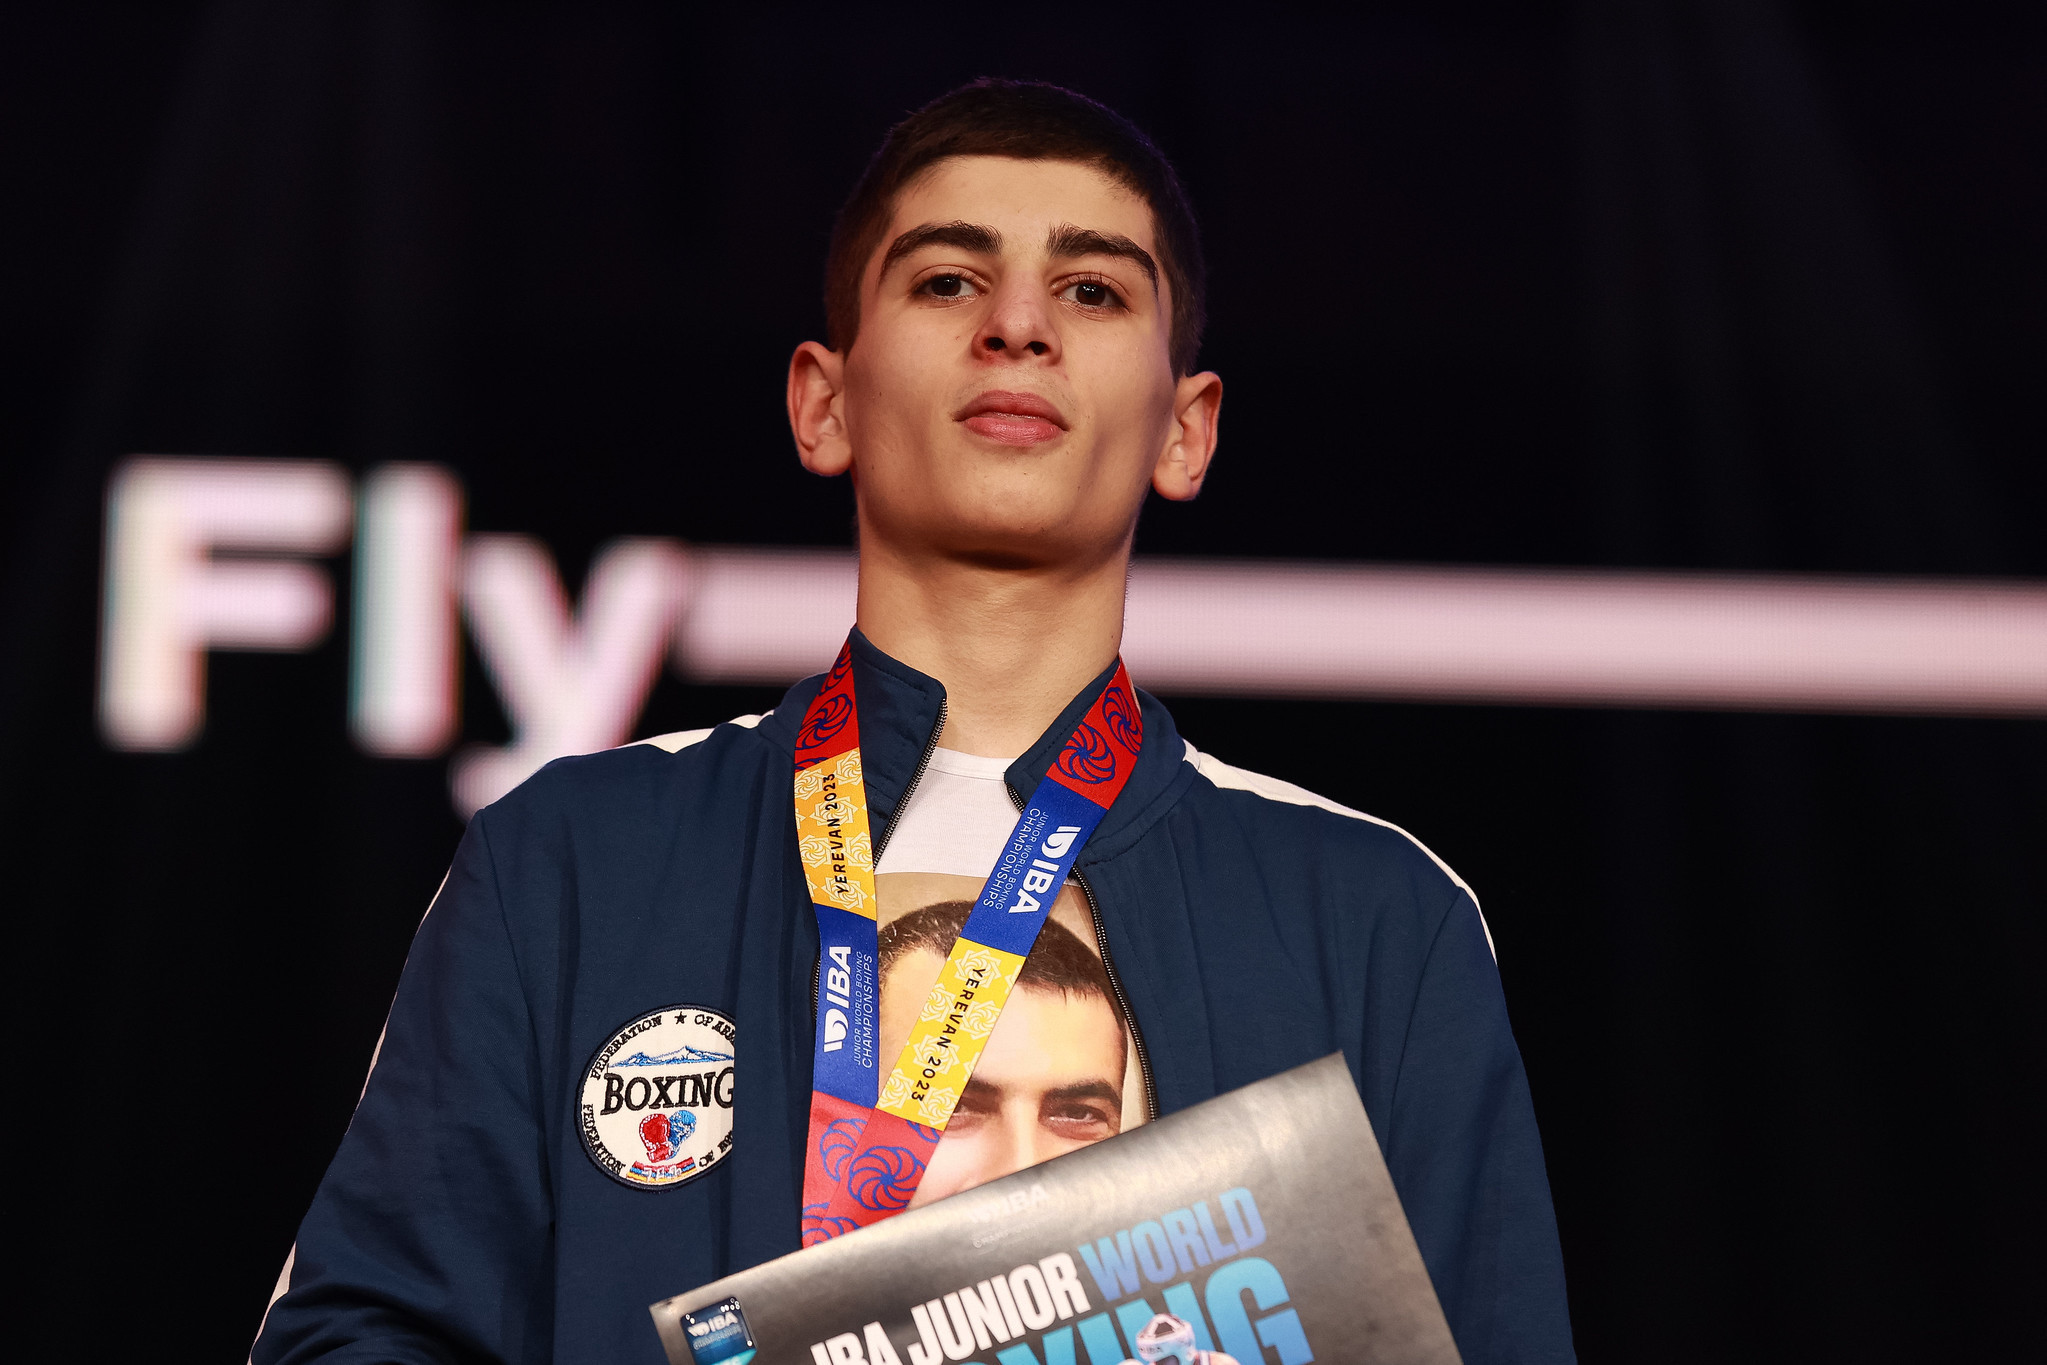 The World Junior Champion from Armenia aims Olympic gold in the future © IBA